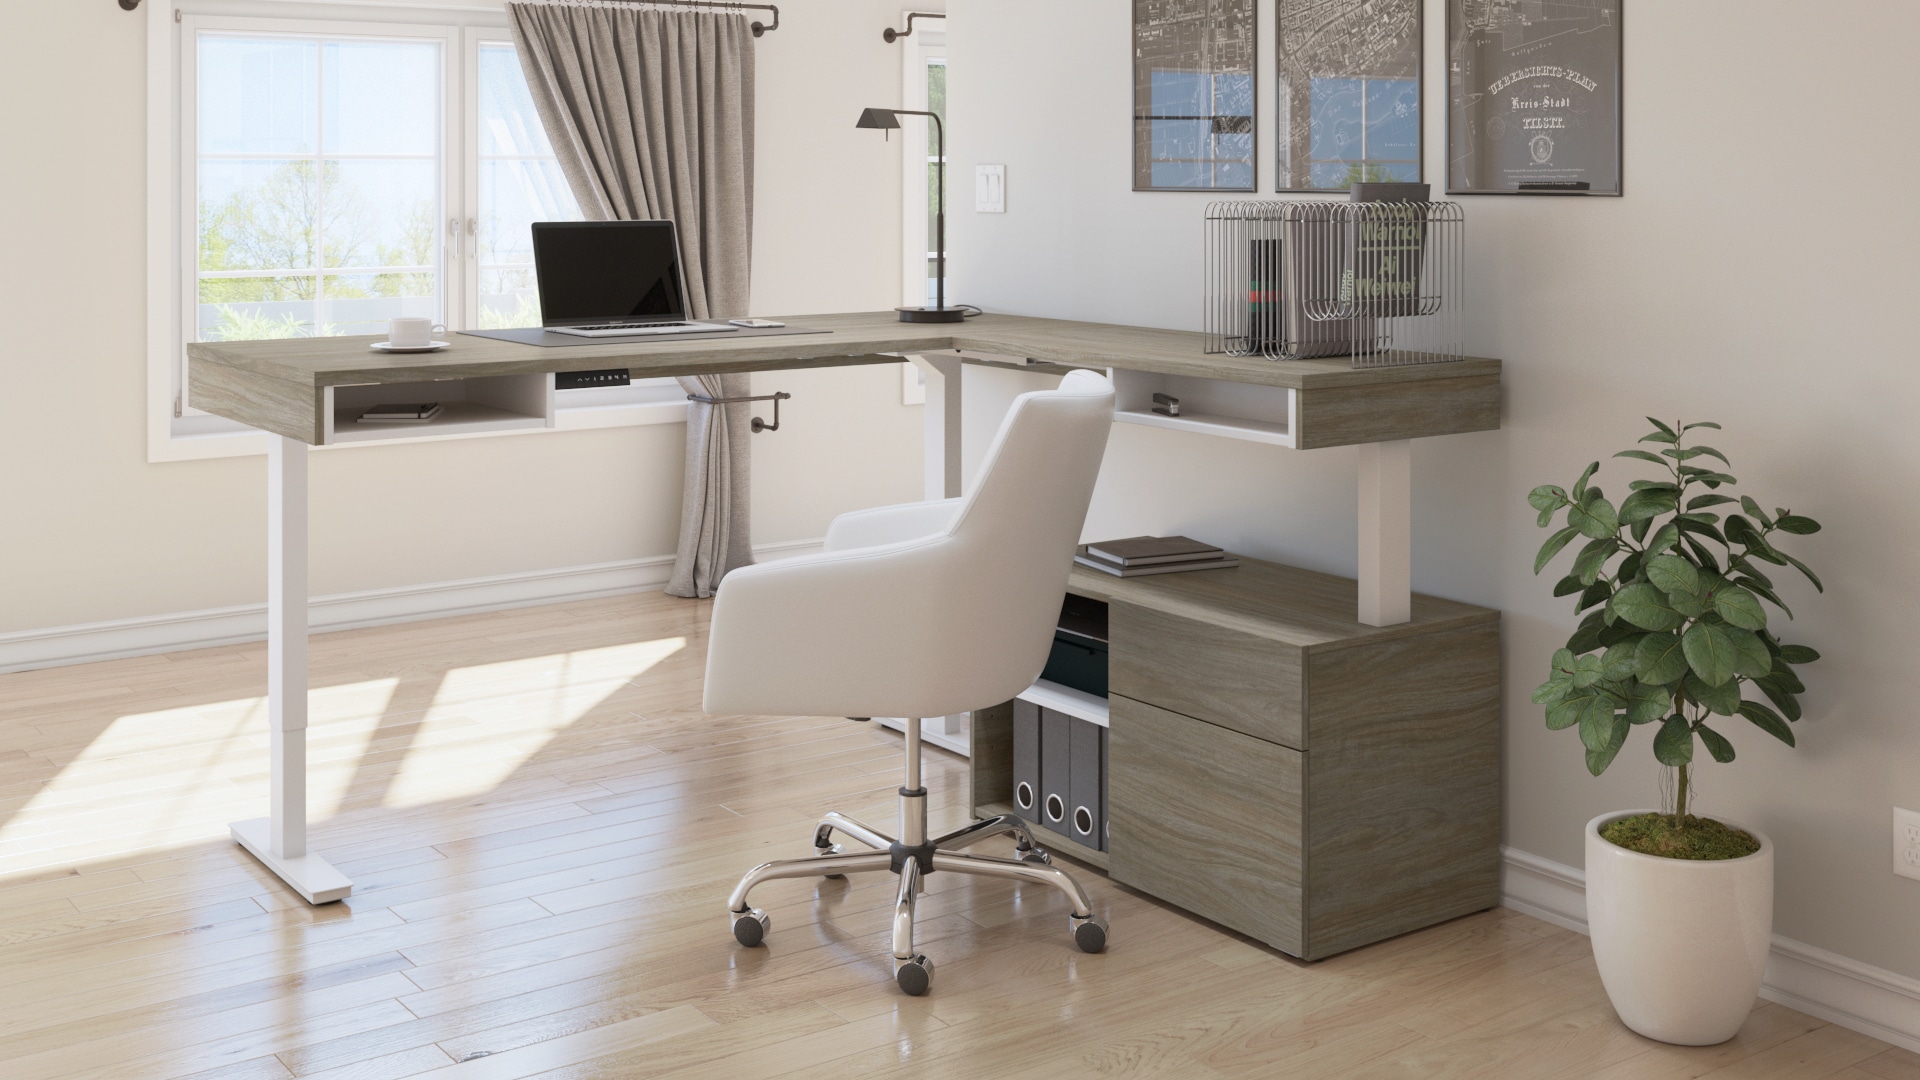 Bestar standing desk with credenza in a bright space